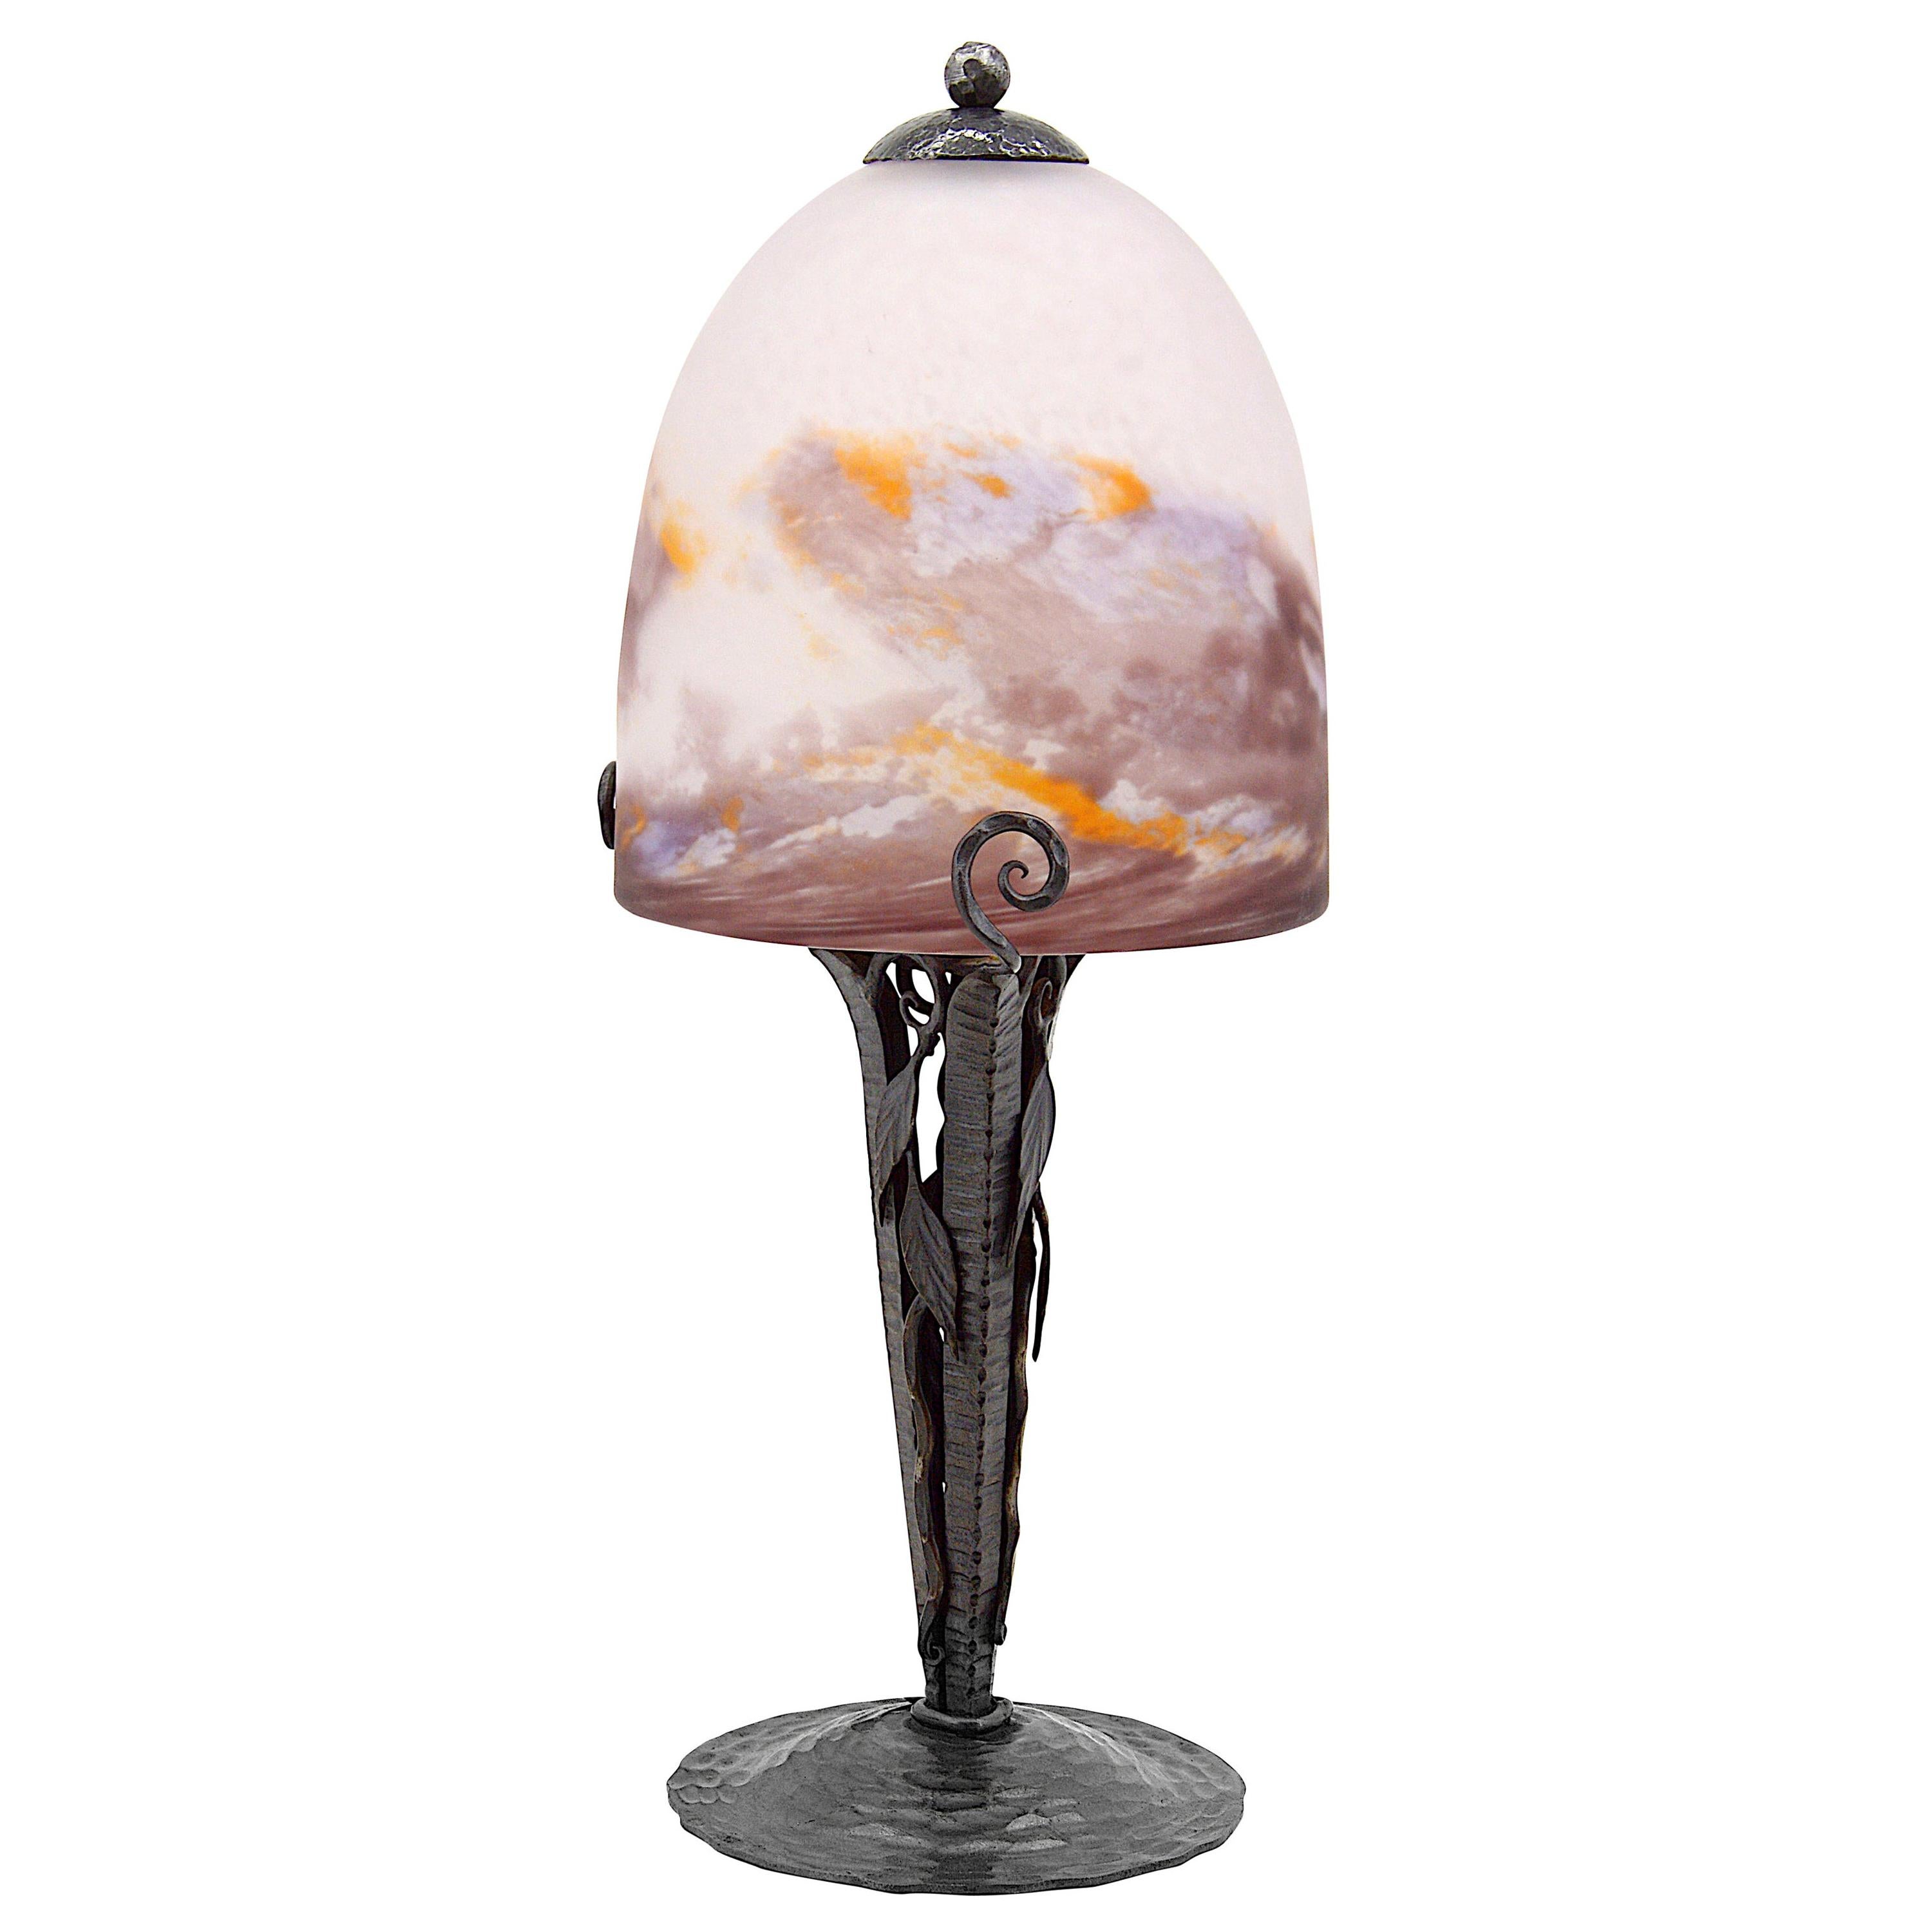 Degue French Art Deco Mottled Table Lamp, Late 1920s